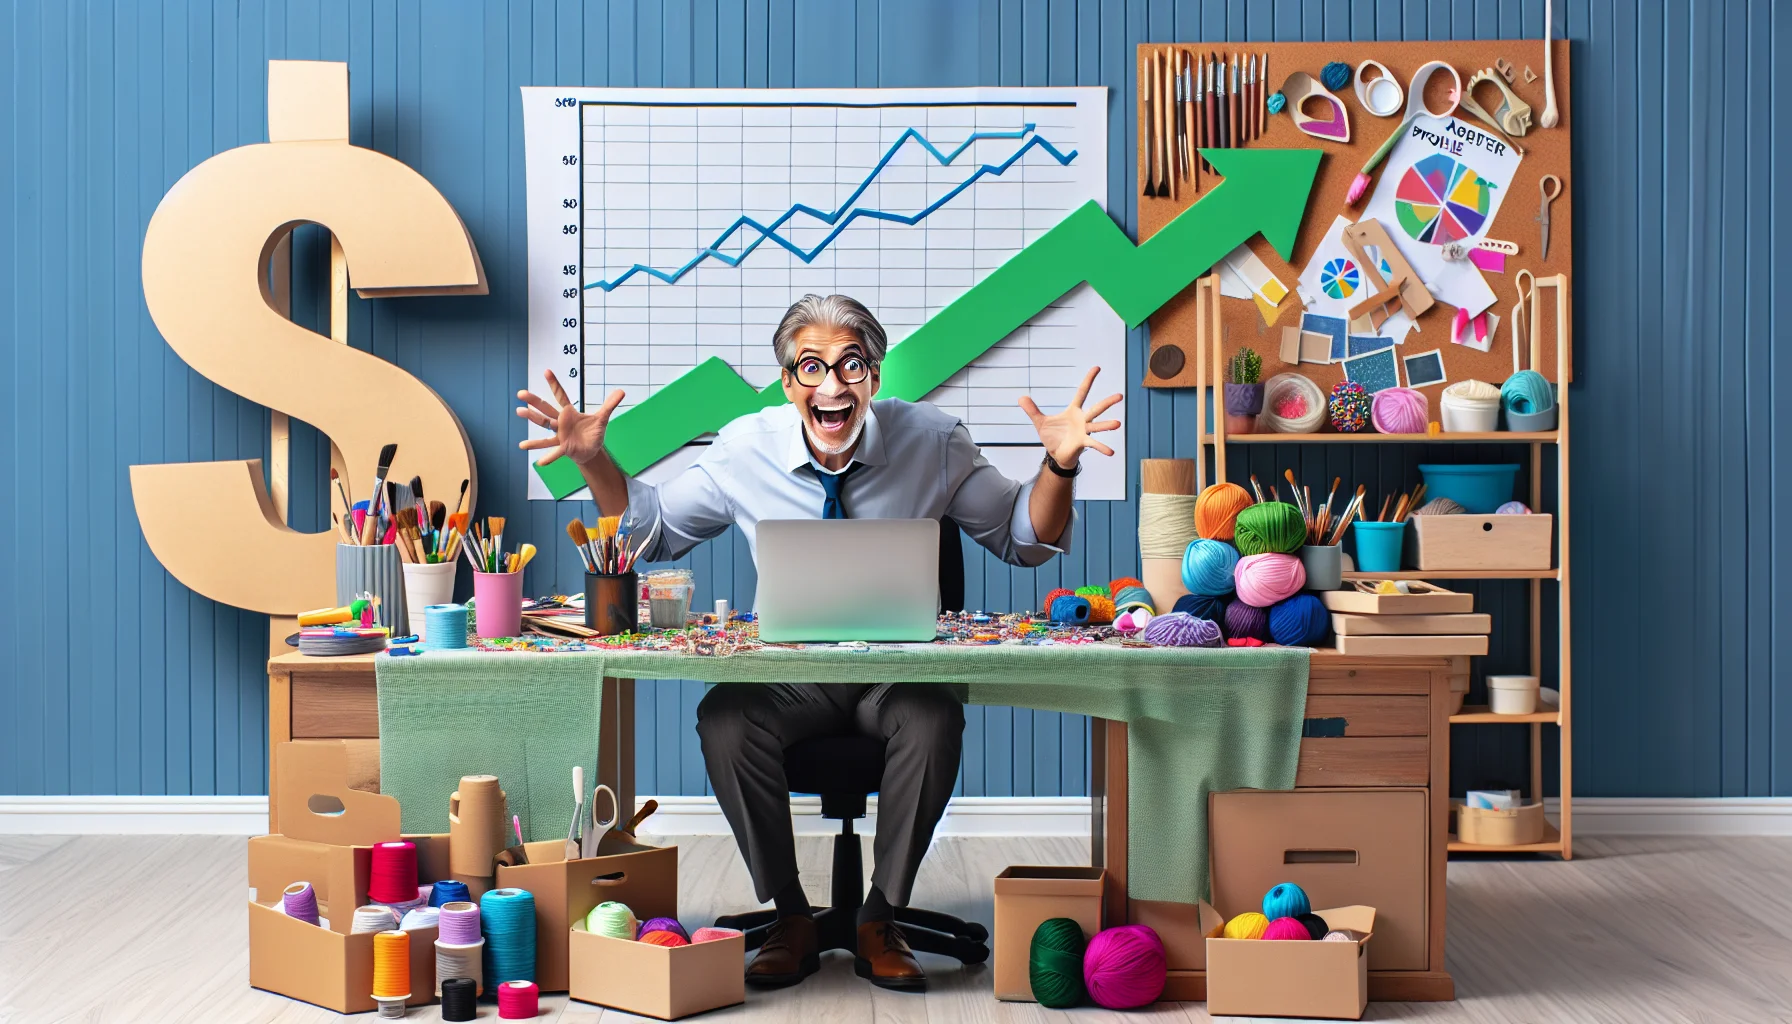 Create a comical and realistic scene associated with an online arts and crafts supply affiliate program. Visualize an eager and excited, middle-aged, Caucasian man sitting at a desk with a computer screen displaying graphs of rising profits. His home office is cluttered with craft materials - multi-colored yarns, paintbrushes, glue sticks, and wooden frames. Nearby, there's a table showcasing various completed DIY craft projects, demonstrating the products from the craft retailer. An oversized, lighthearted dollar sign hangs in the background, symbolizing the potential of earning money online through the affiliate program.